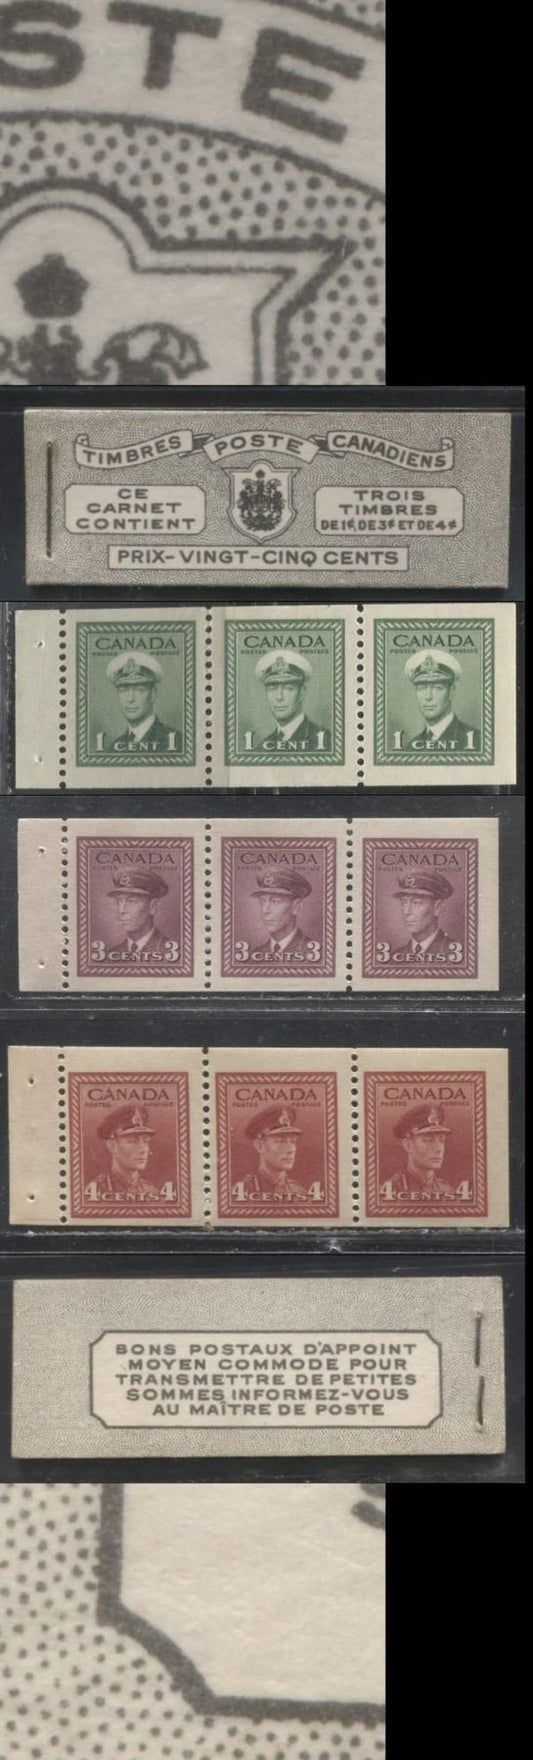 Lot 292 Canada #BK38a 1942-1949 War Issue Complete 25c, French Booklet Containing 1 Pane Each of 3 of 1c Green, 3c Rosy Plum and 4c Carmine Red, Harris Front Cover Type Vc , Back Cover Jvii, 7c & 6c Rate Page